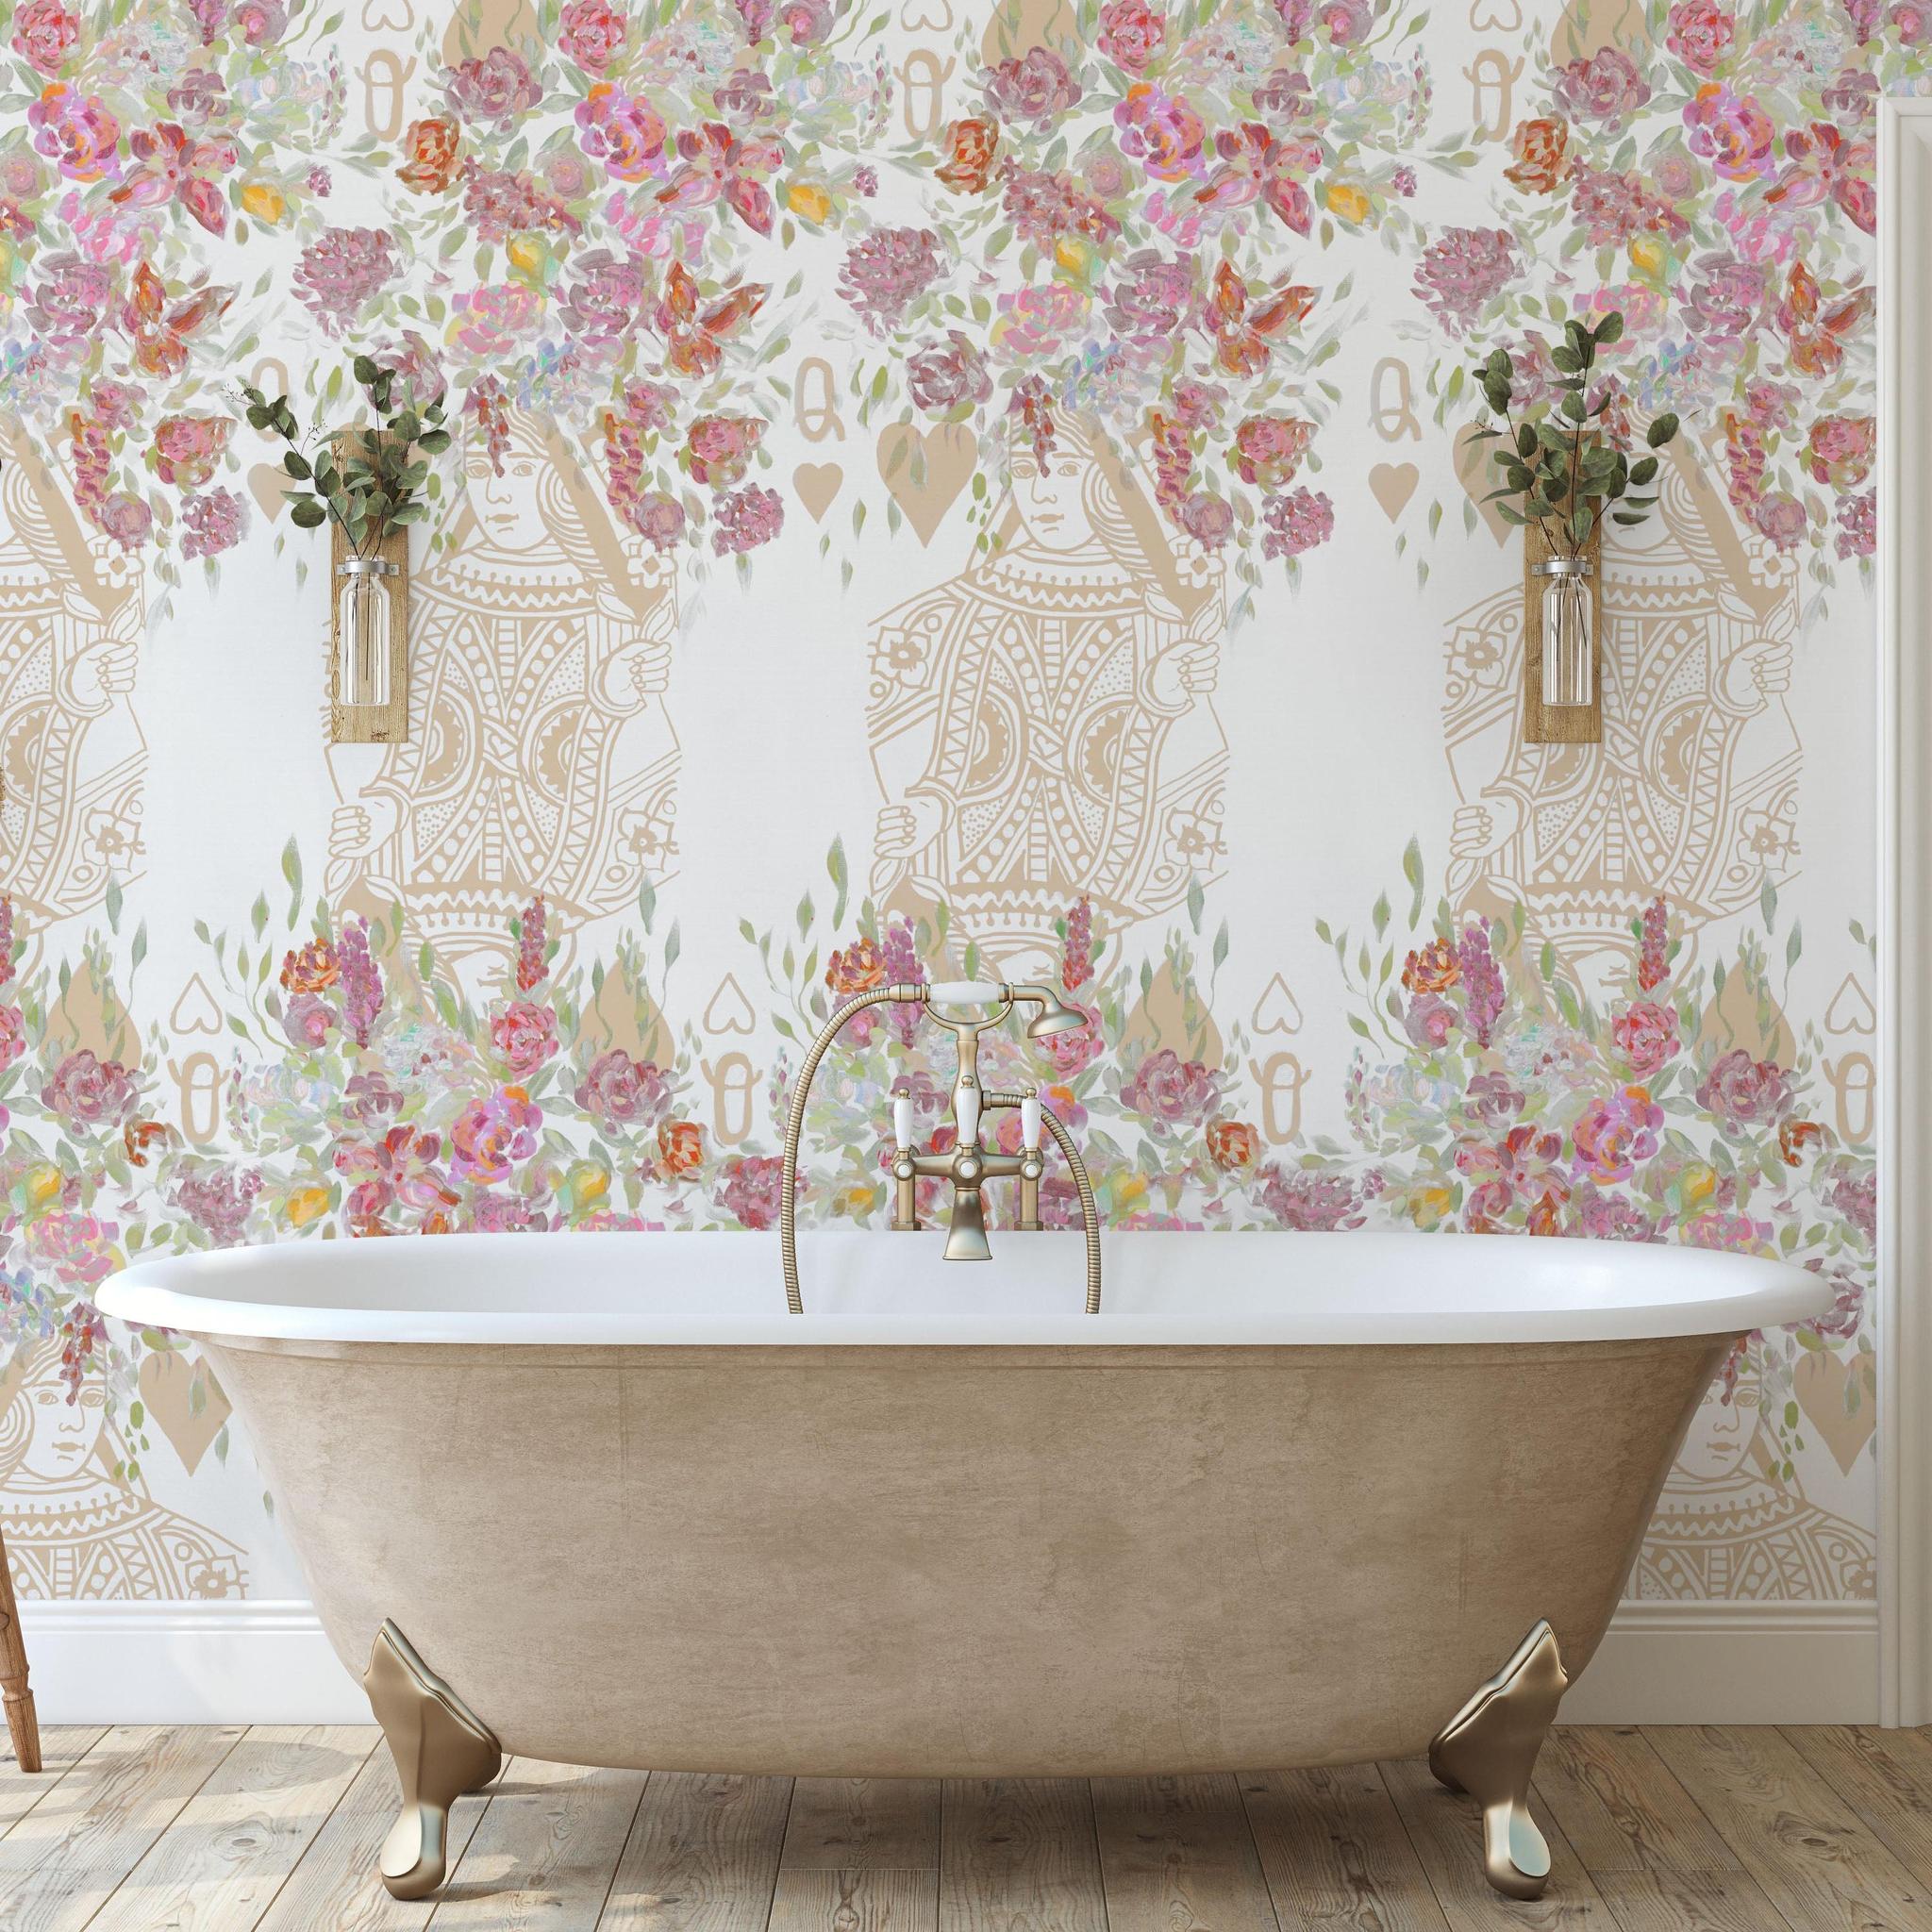 Elegant Dynasty Wallpaper from The Katie Small Line enhancing a stylish bathroom interior.
